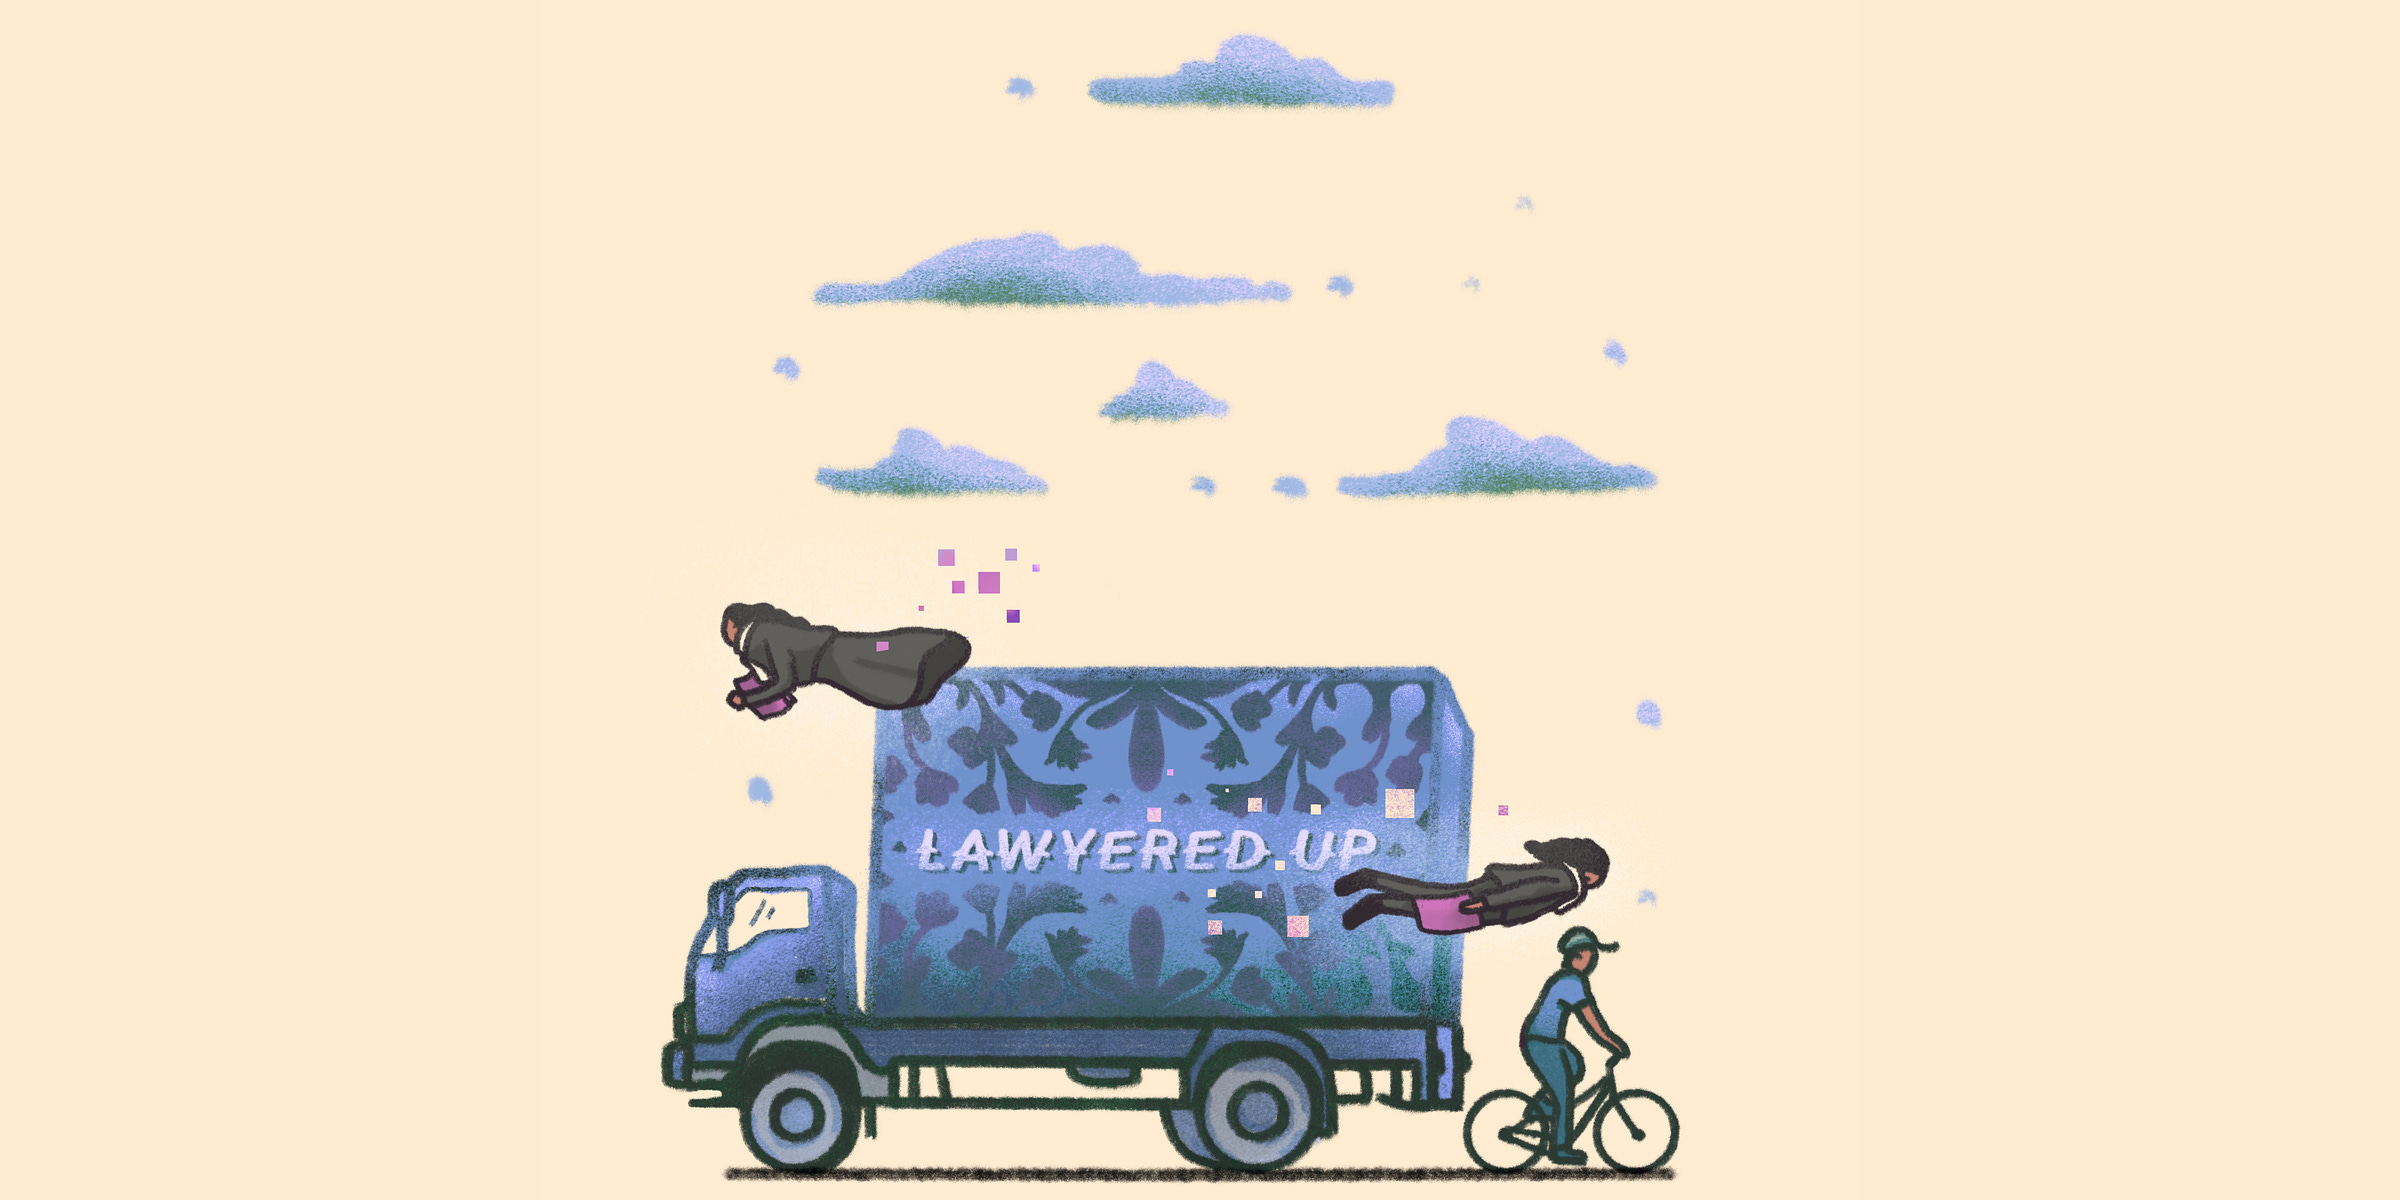 A truck is moving on the road with a man riding a bicycle going in the other direction. Two female lawyers are magically flying around the truck